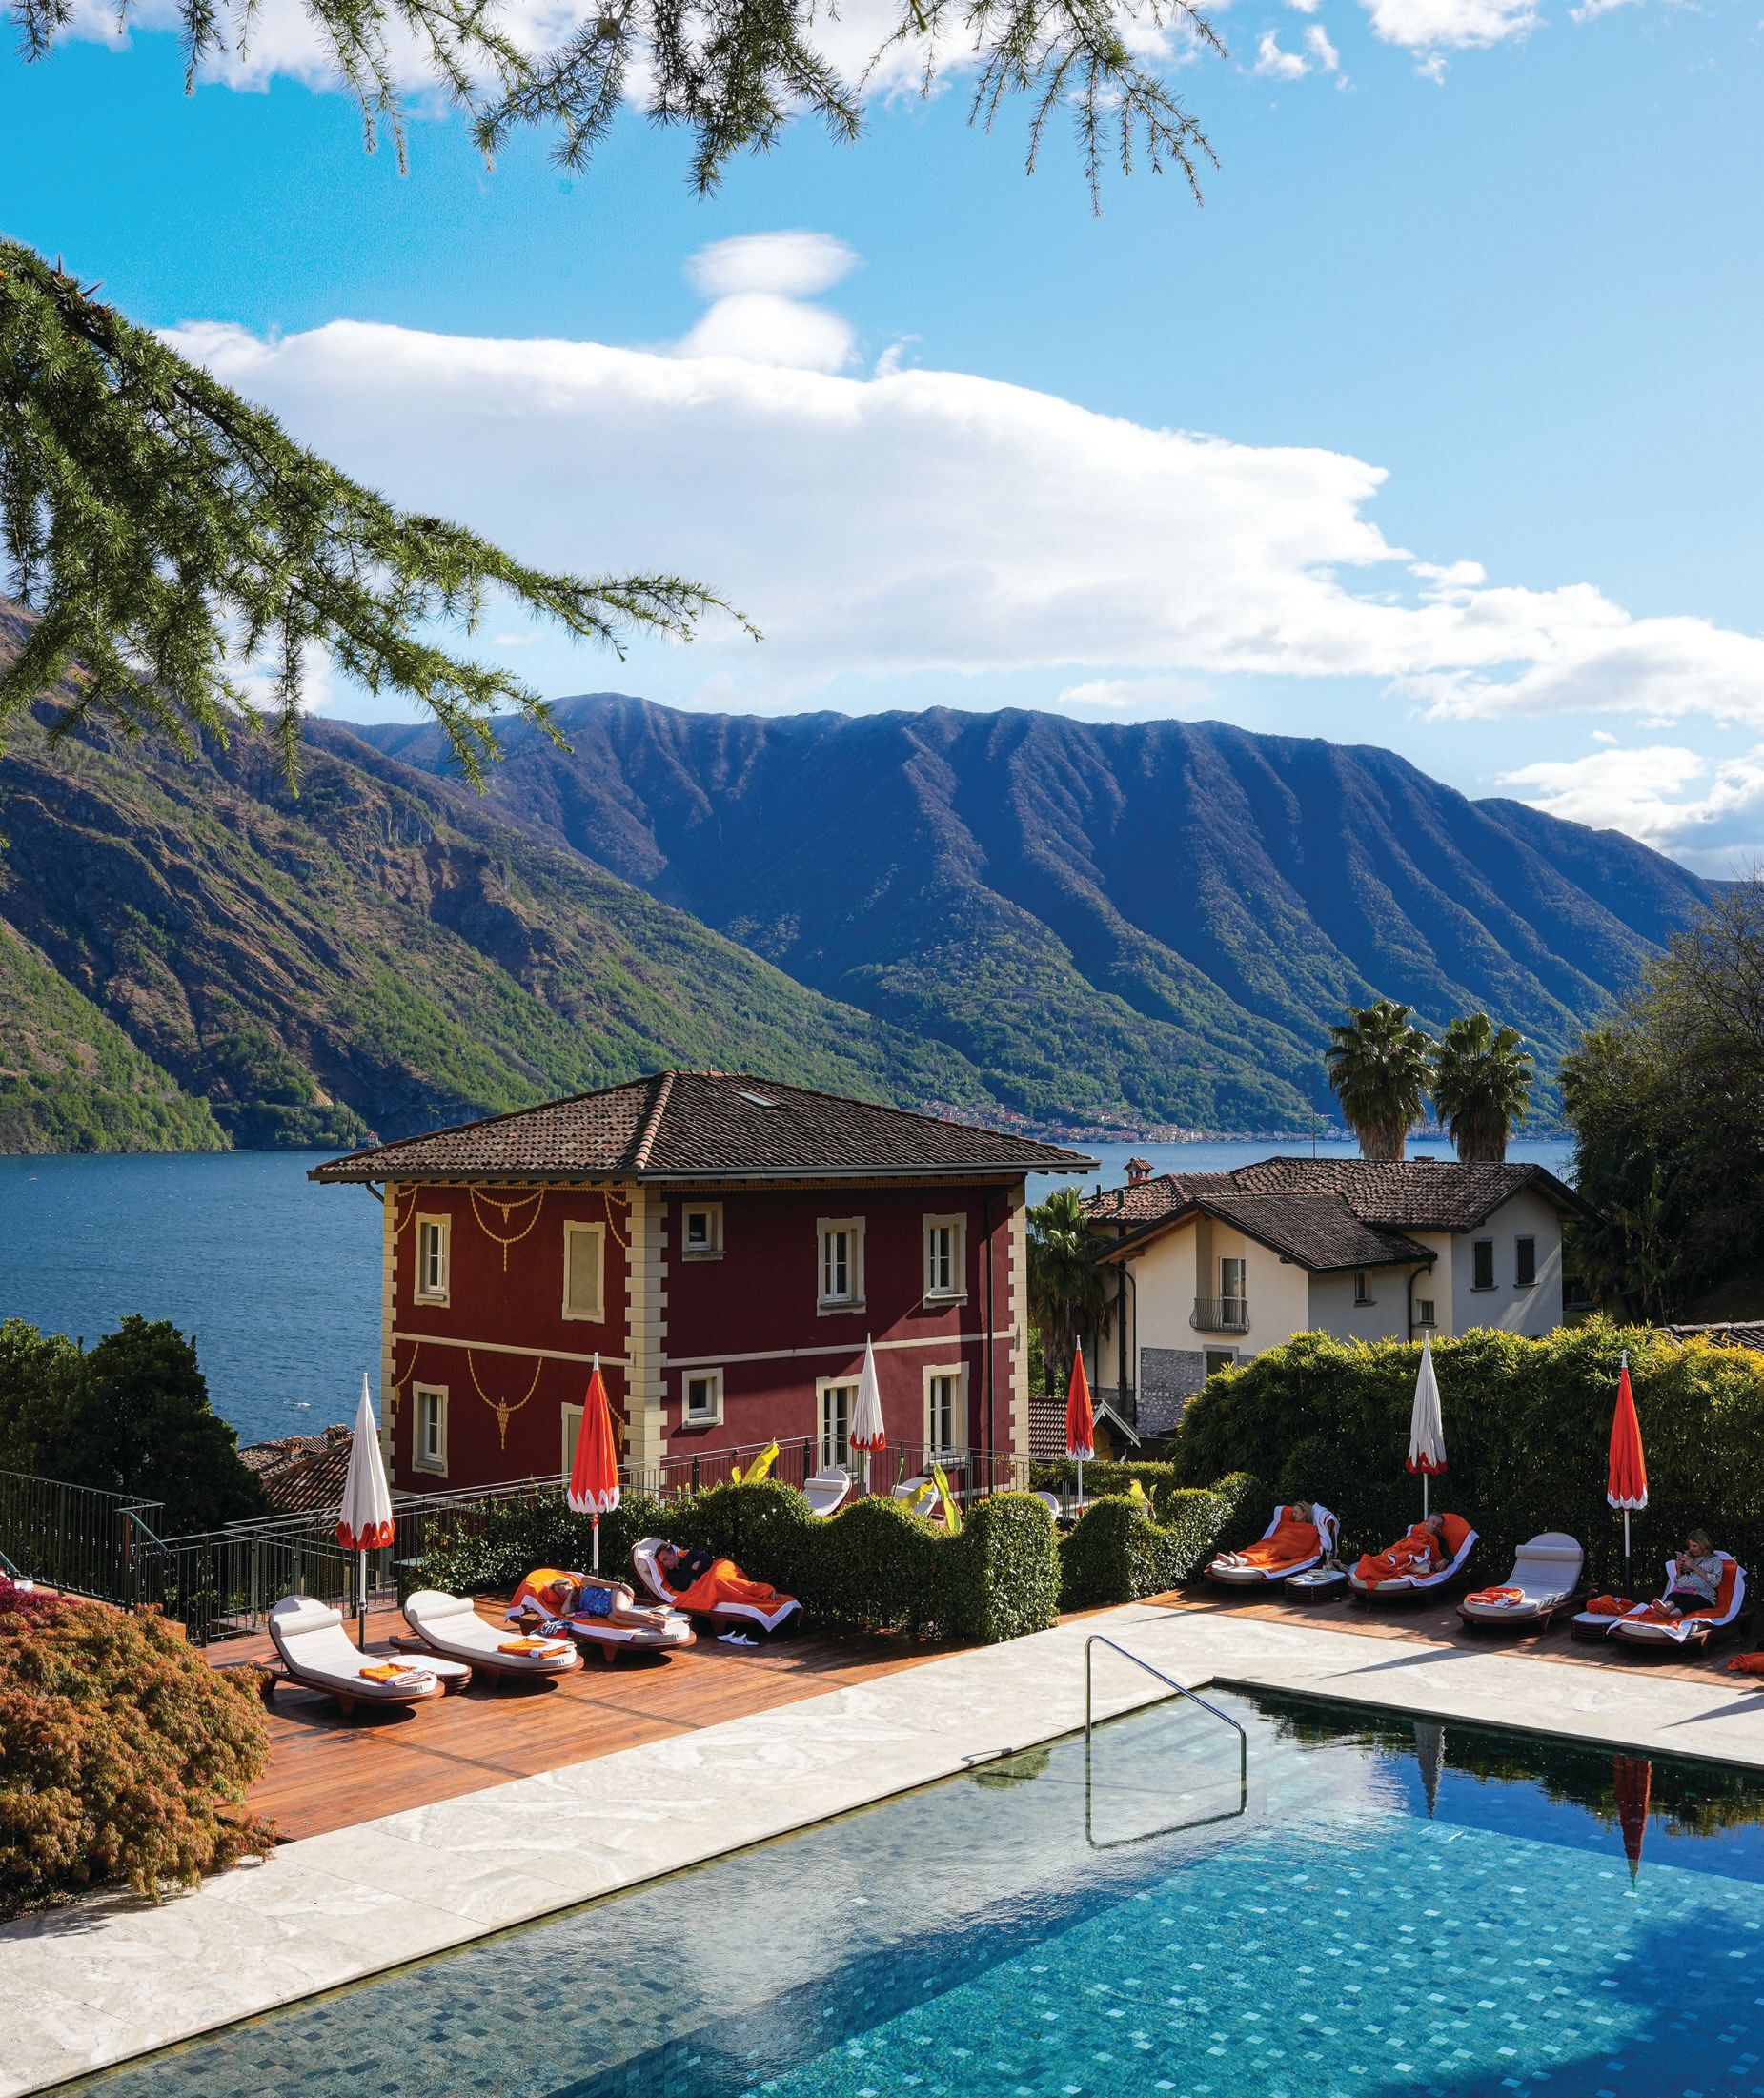 The view of the lake from one of the pools at Grand Hotel Tremezzo, the oldest resort on Italy’s Lake Como PHOTO BY MICHAEL MCCARTHY